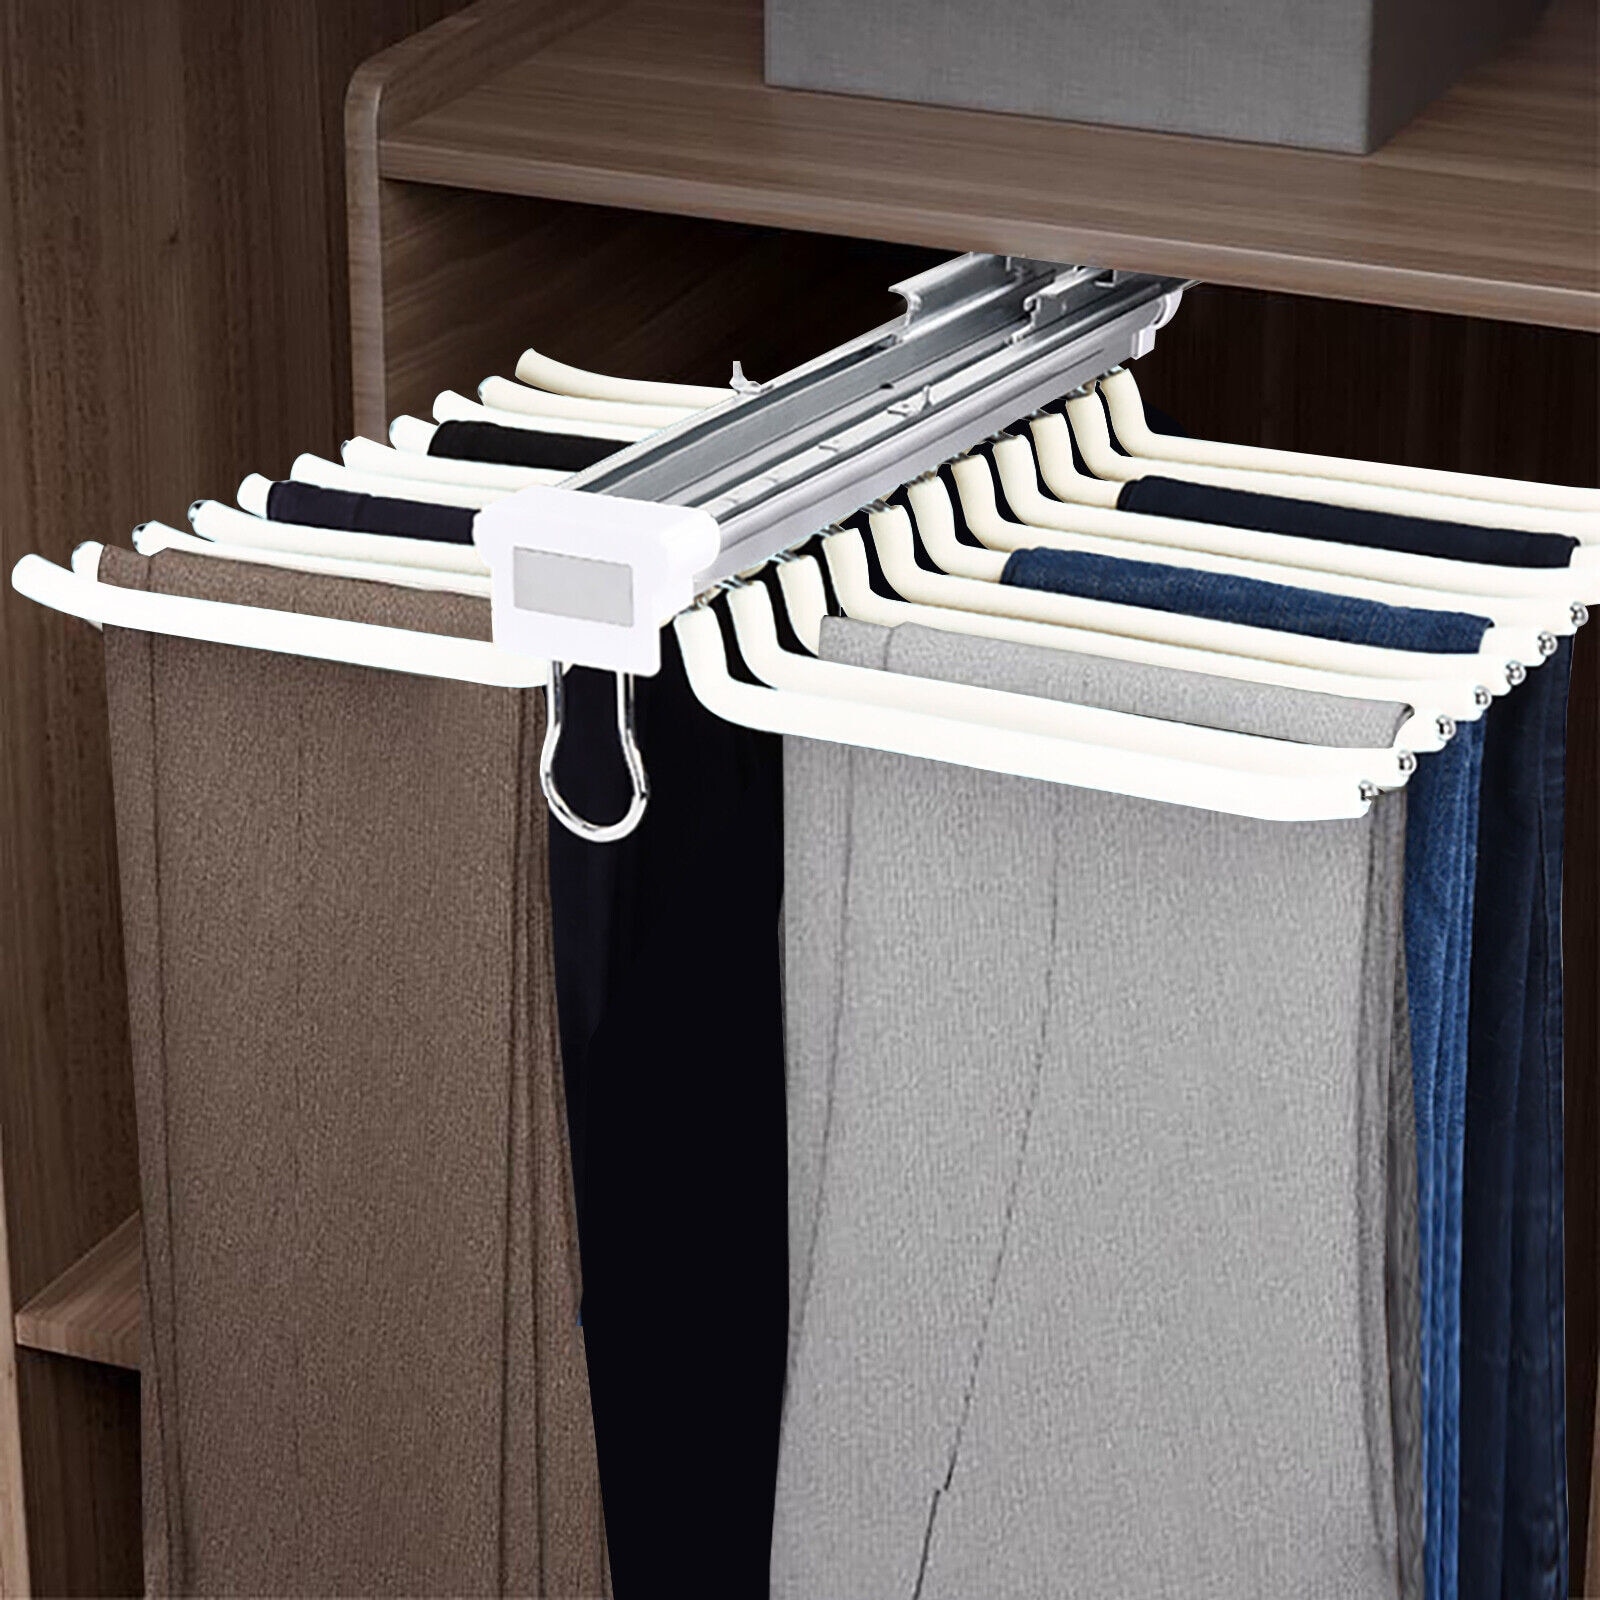 MYOYAY Pull Out Trousers Rack 22 Arms Steel Pull Out Pants Rack Pants  Hanger Bar Clothes Organizers for Closet for Space Saving and Storage  Maximum